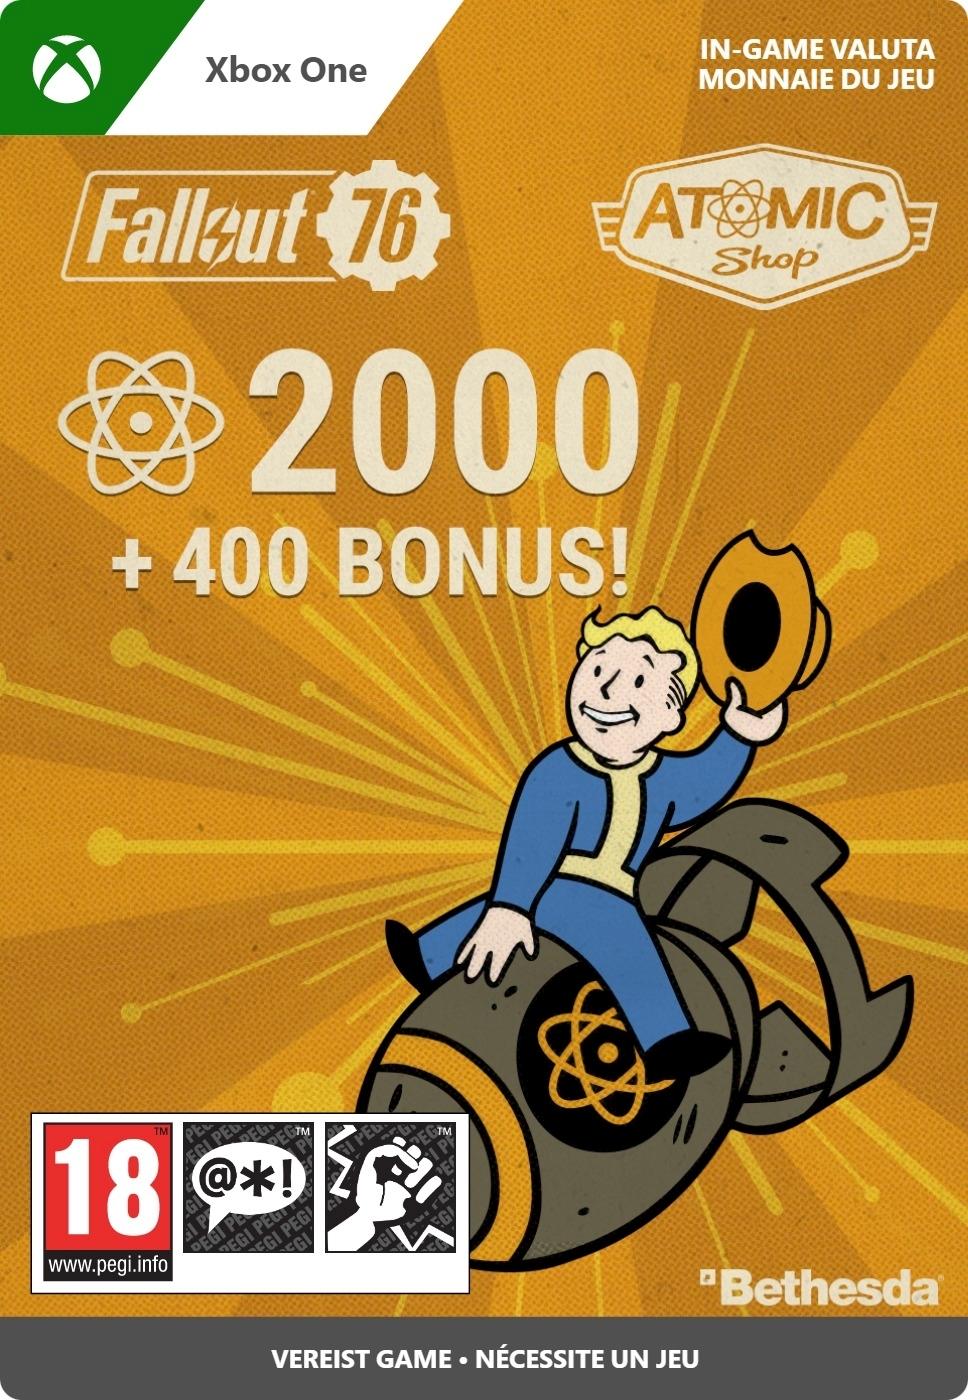 Fallout 76: 2000 (+400 Bonus) Atoms - Xbox One - Currency | 7LM-00057 (eef0ca54-af99-7b48-938e-1acd46430663)